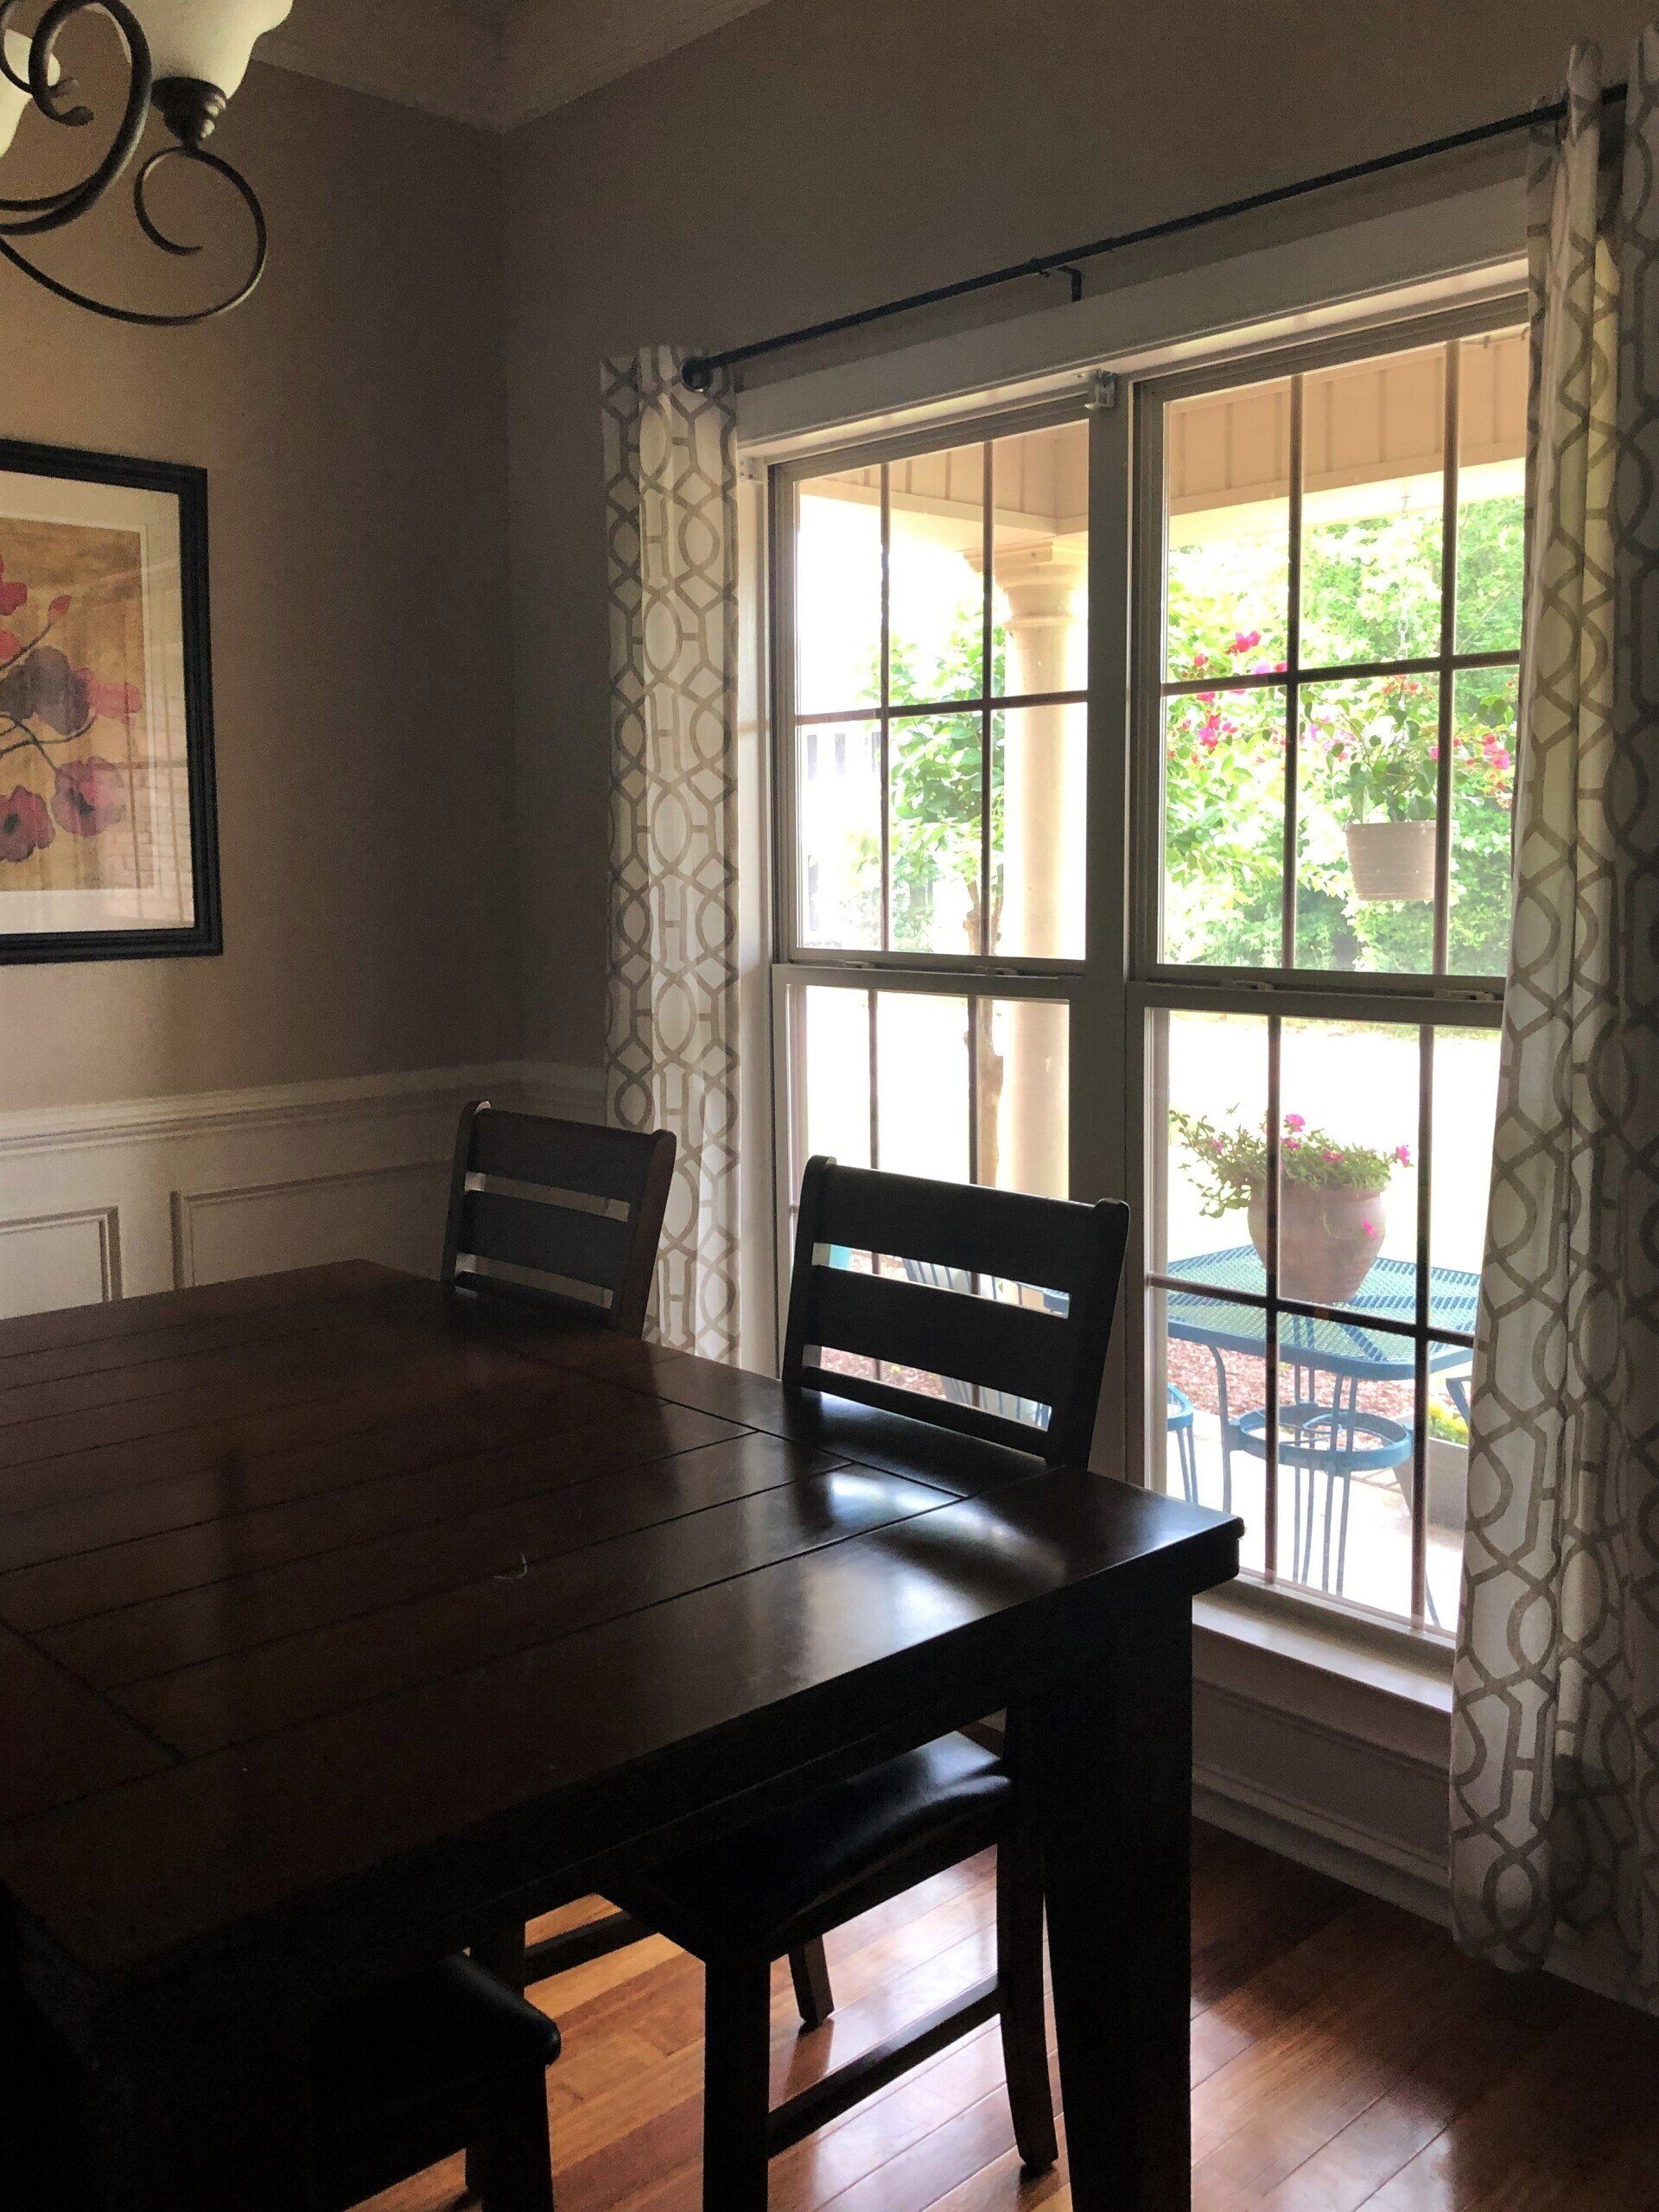 residential window tinting - Bright UV light distortion was noticeably eliminated, along with 74%  heat. After SPF Lt Rose Platinum Home Tint in Prattville, AL